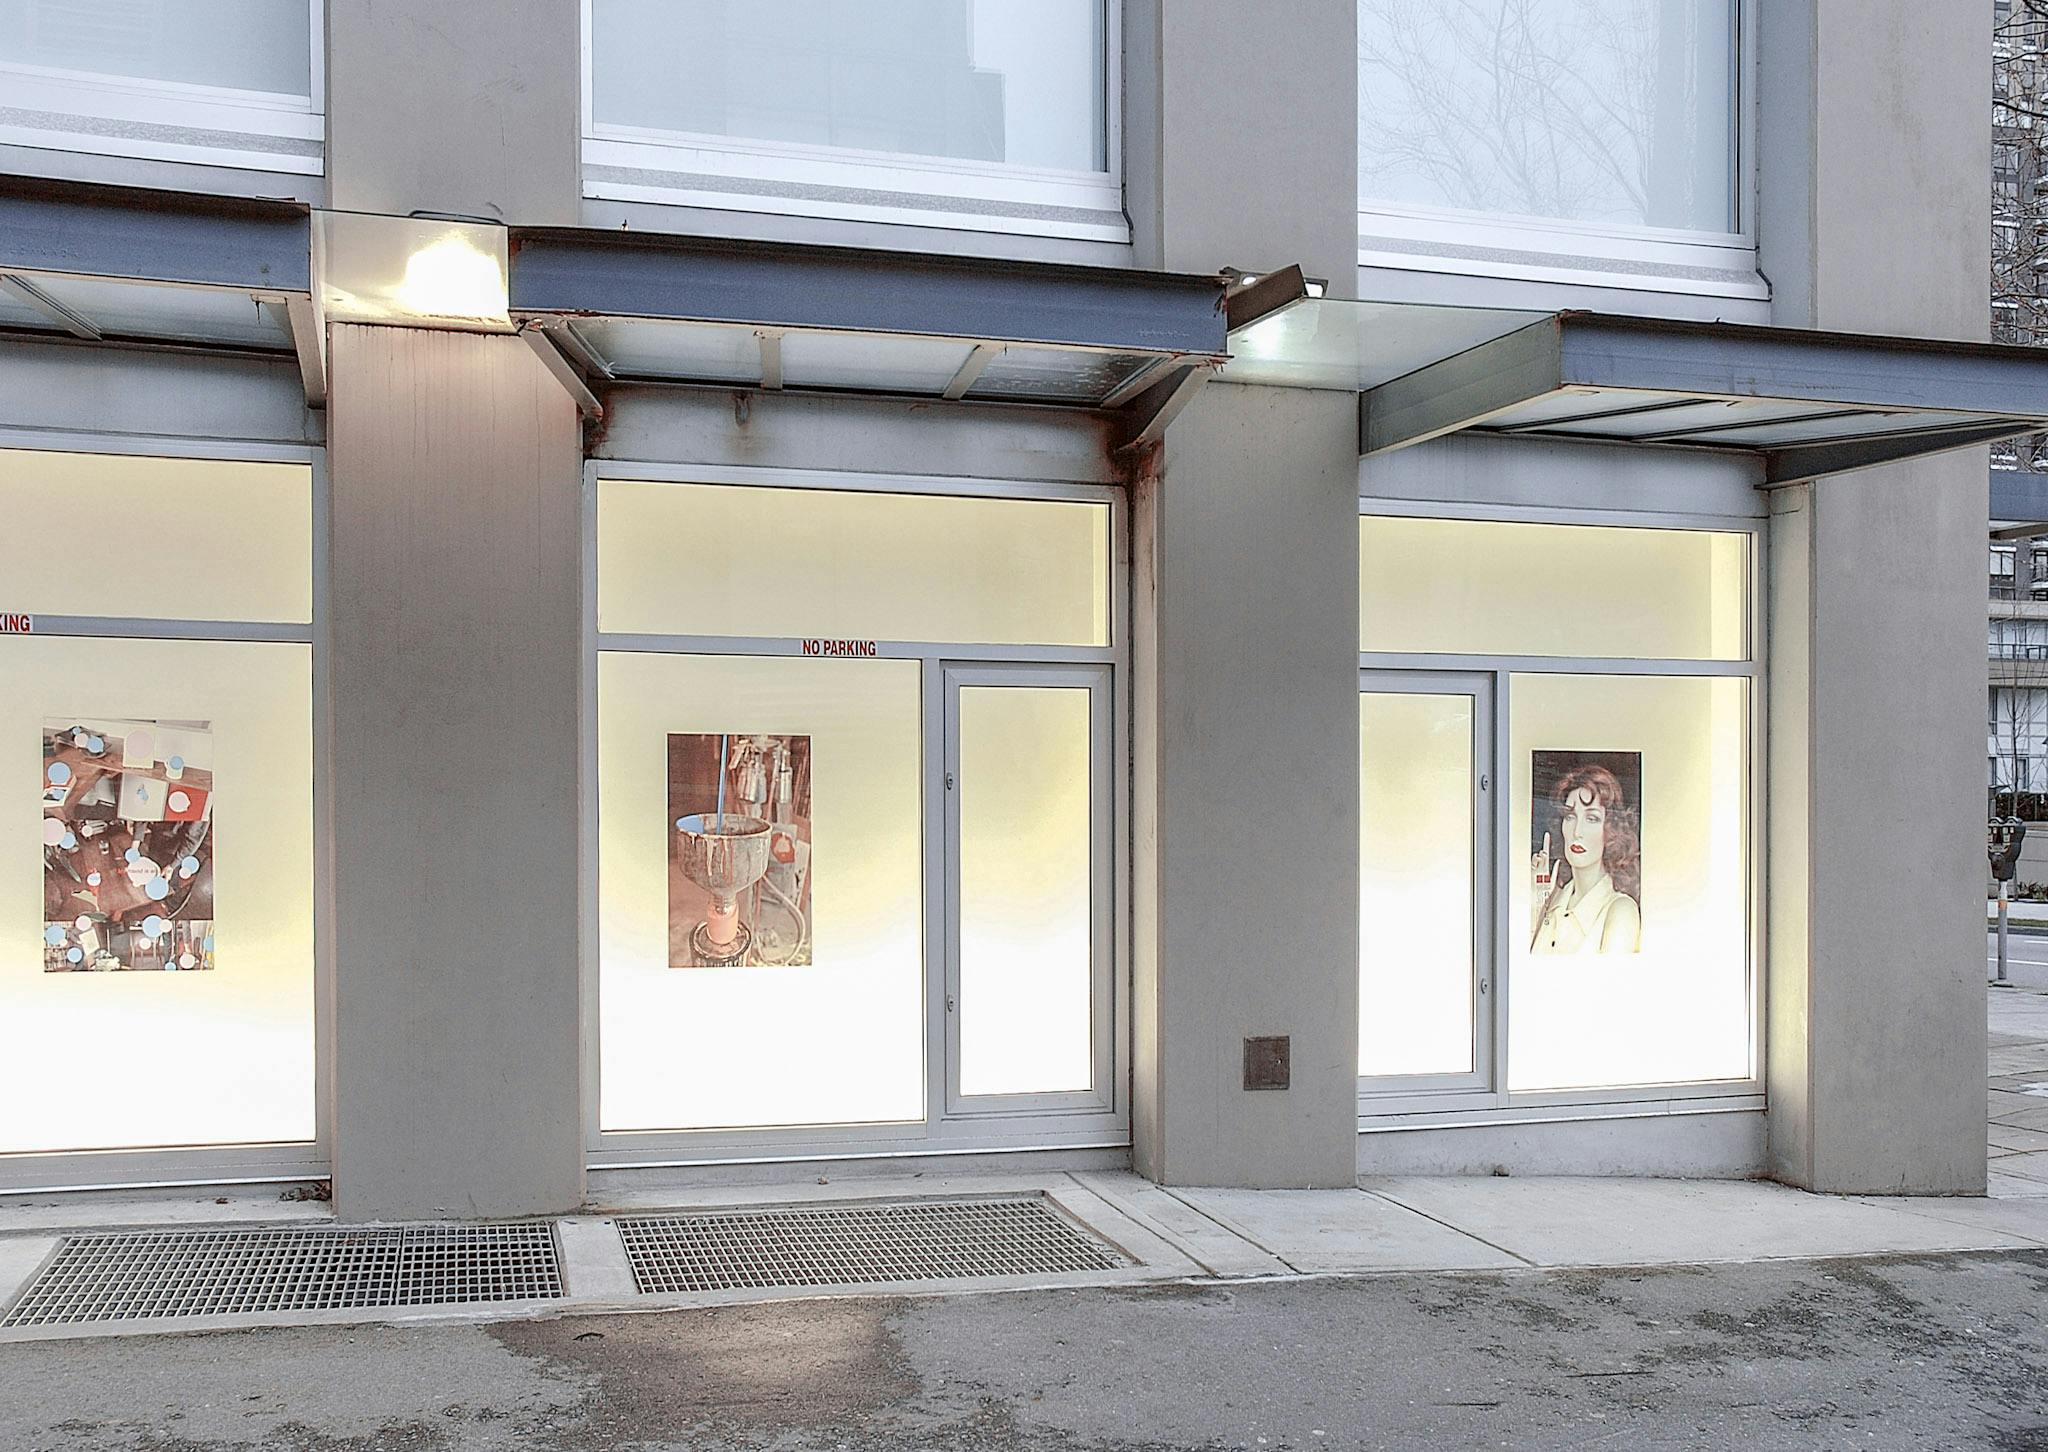 Each of the CAG exterior window spaces displays a coloured poster made by Andrew Reyes. Images used in two of them were cropped from paintings. The walls behind those windows are pastel yellow.